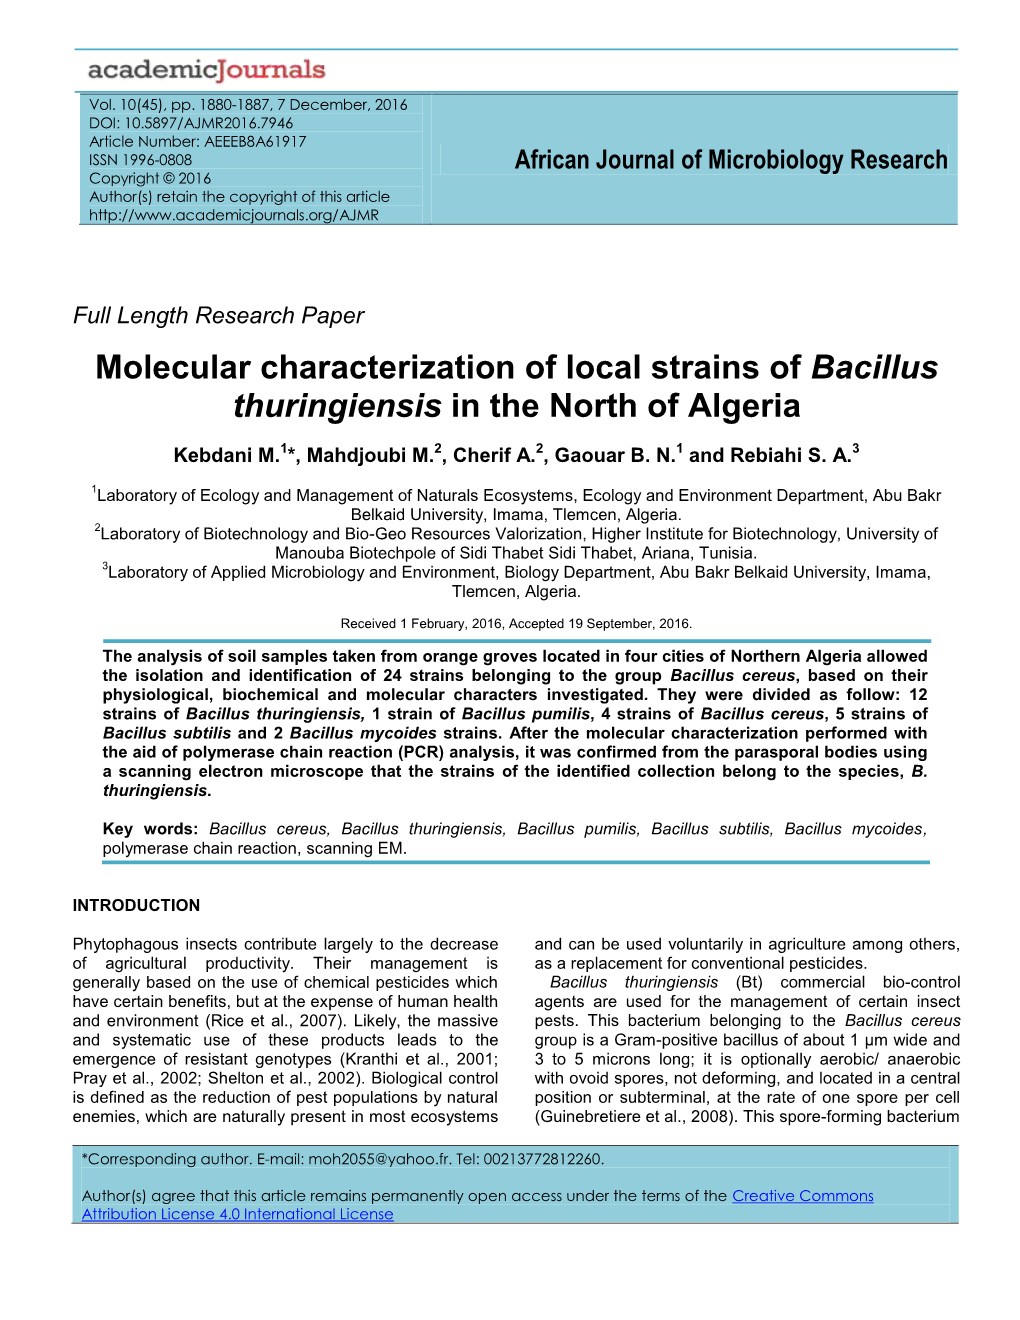 Molecular Characterization of Local Strains of Bacillus Thuringiensis in the North of Algeria